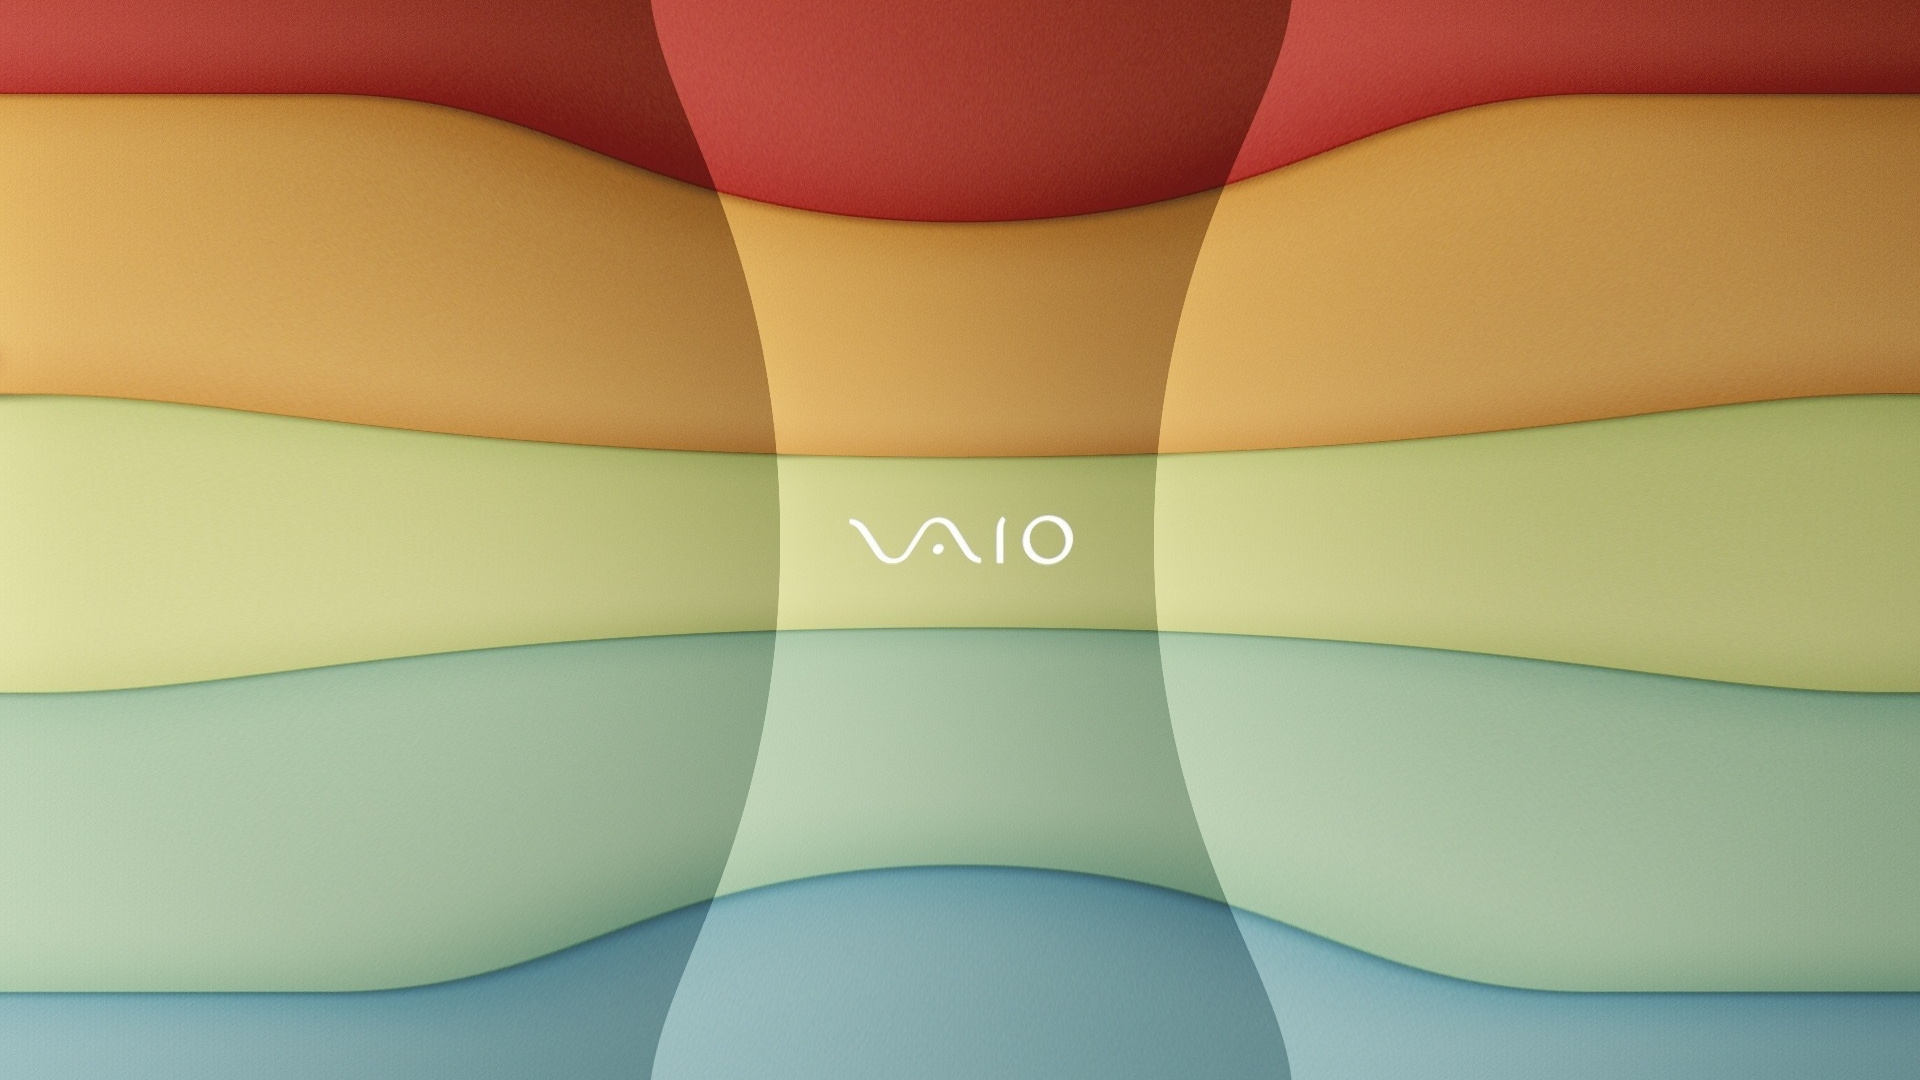 Sony Vaio Full HD, HDTV, 1080p 16:9 Wallpaper, HD Sony Vaio 1920x1080 Background, Free Image Download